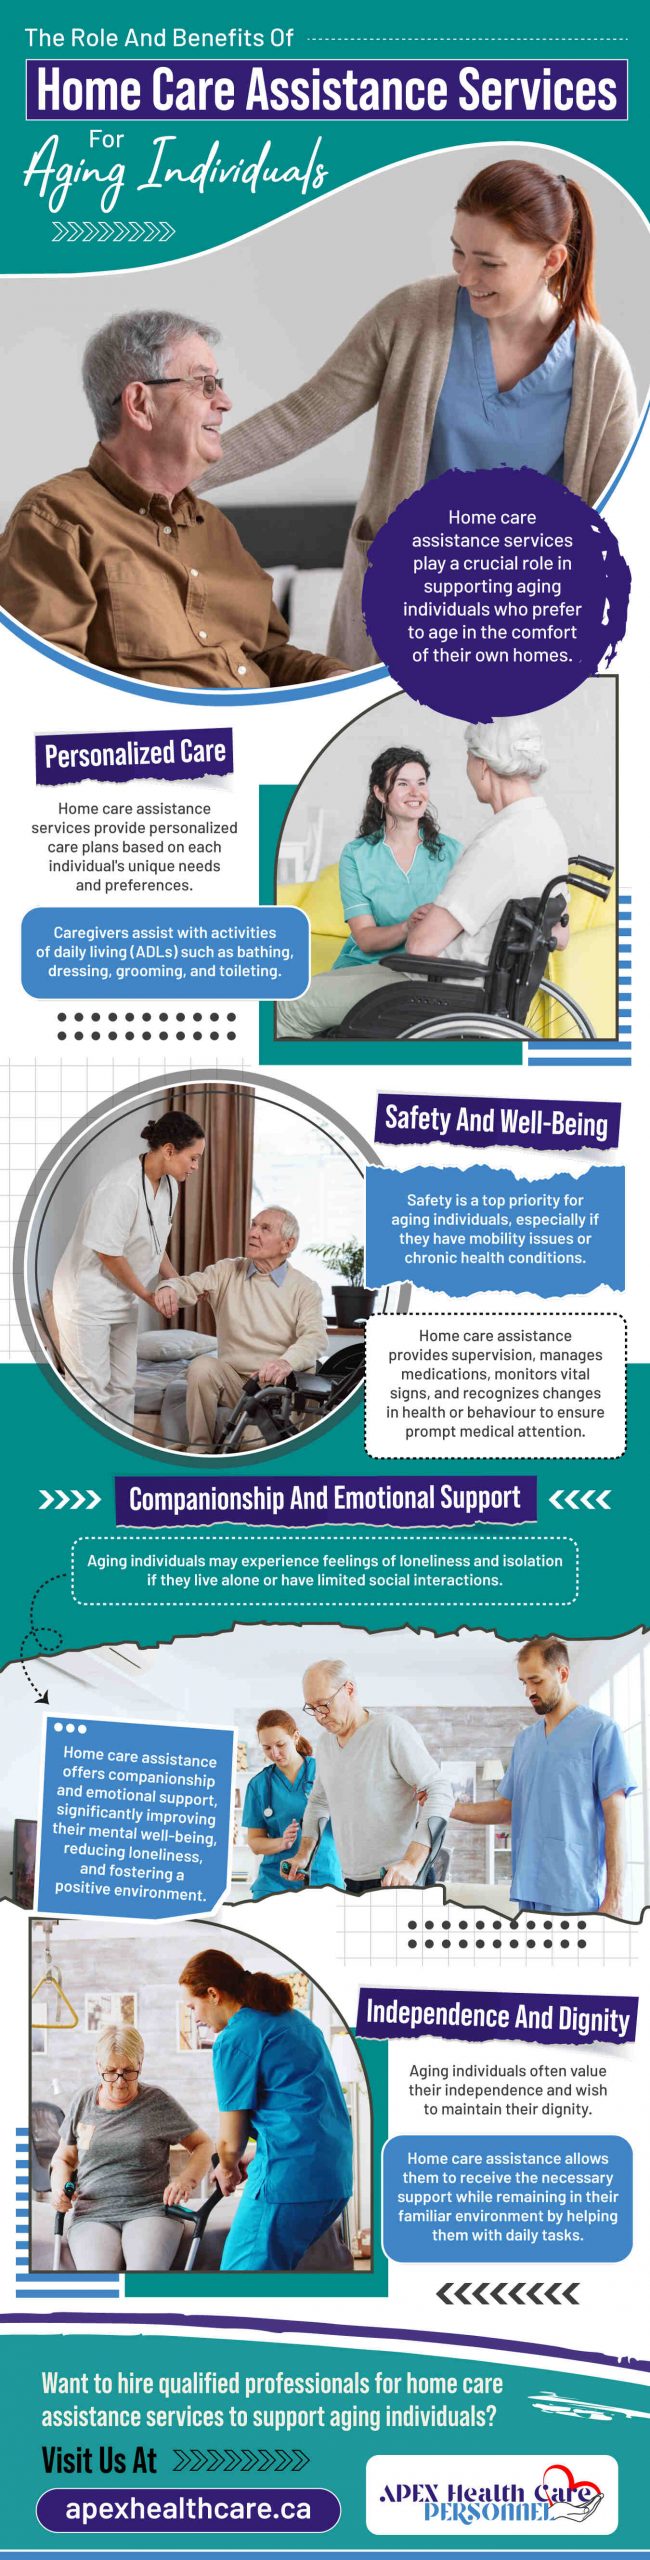 The Role And Benefits Of Home Care Assistance Services For Aging Individuals